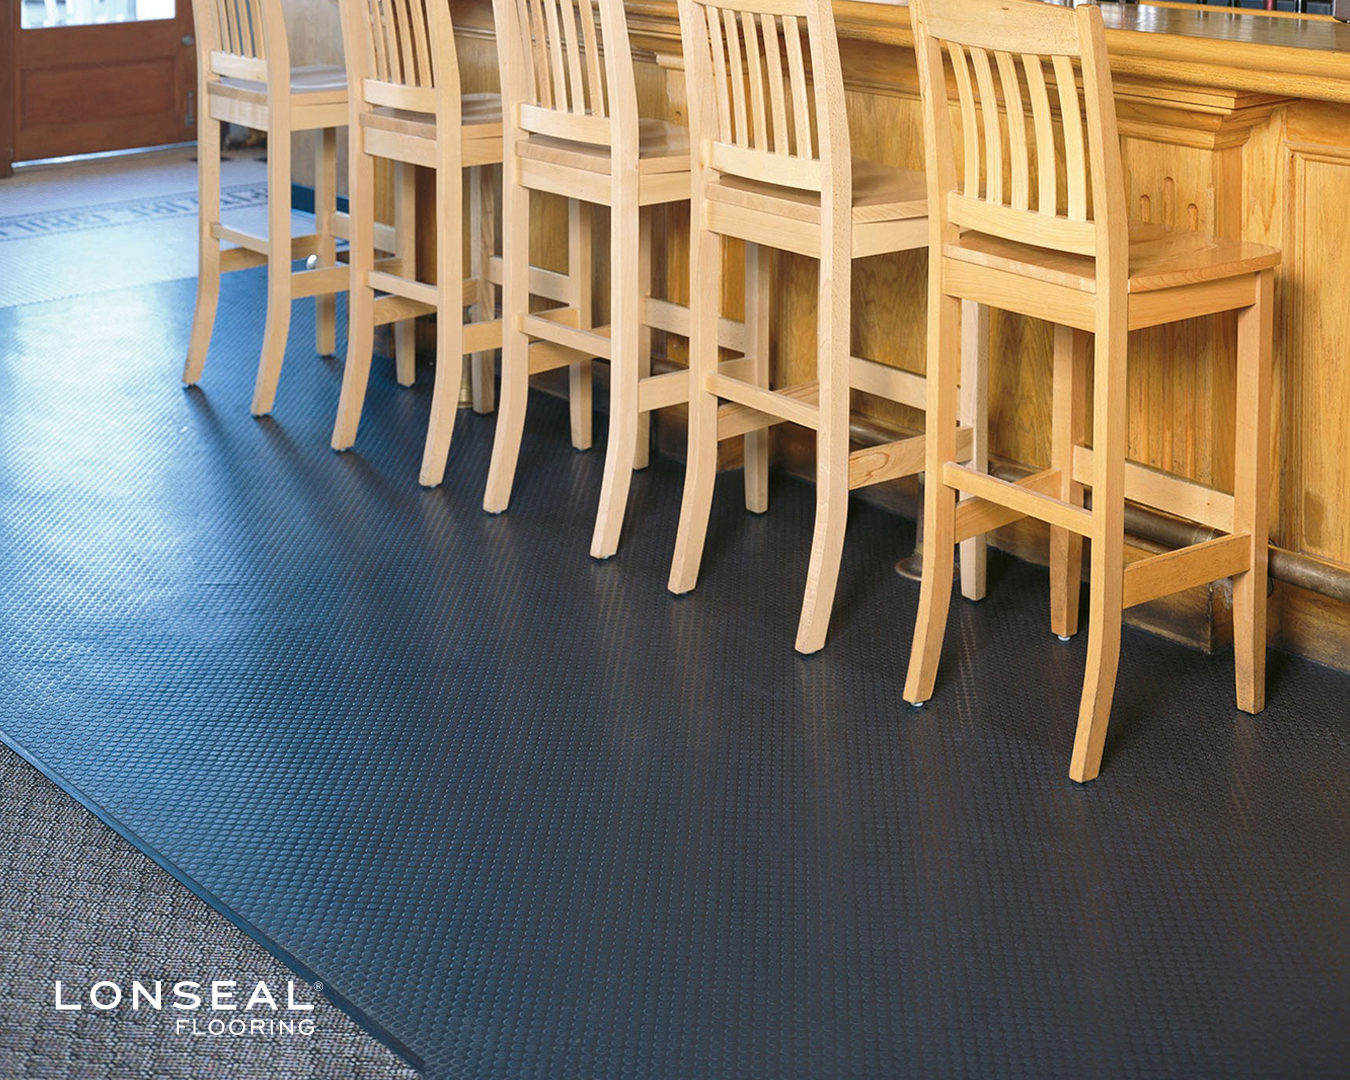 Lonseal, Sheet Vinyl Flooring, LONPOINT MOONWALK is similar to our Loncoin series but is distinguished by smaller (half-inch